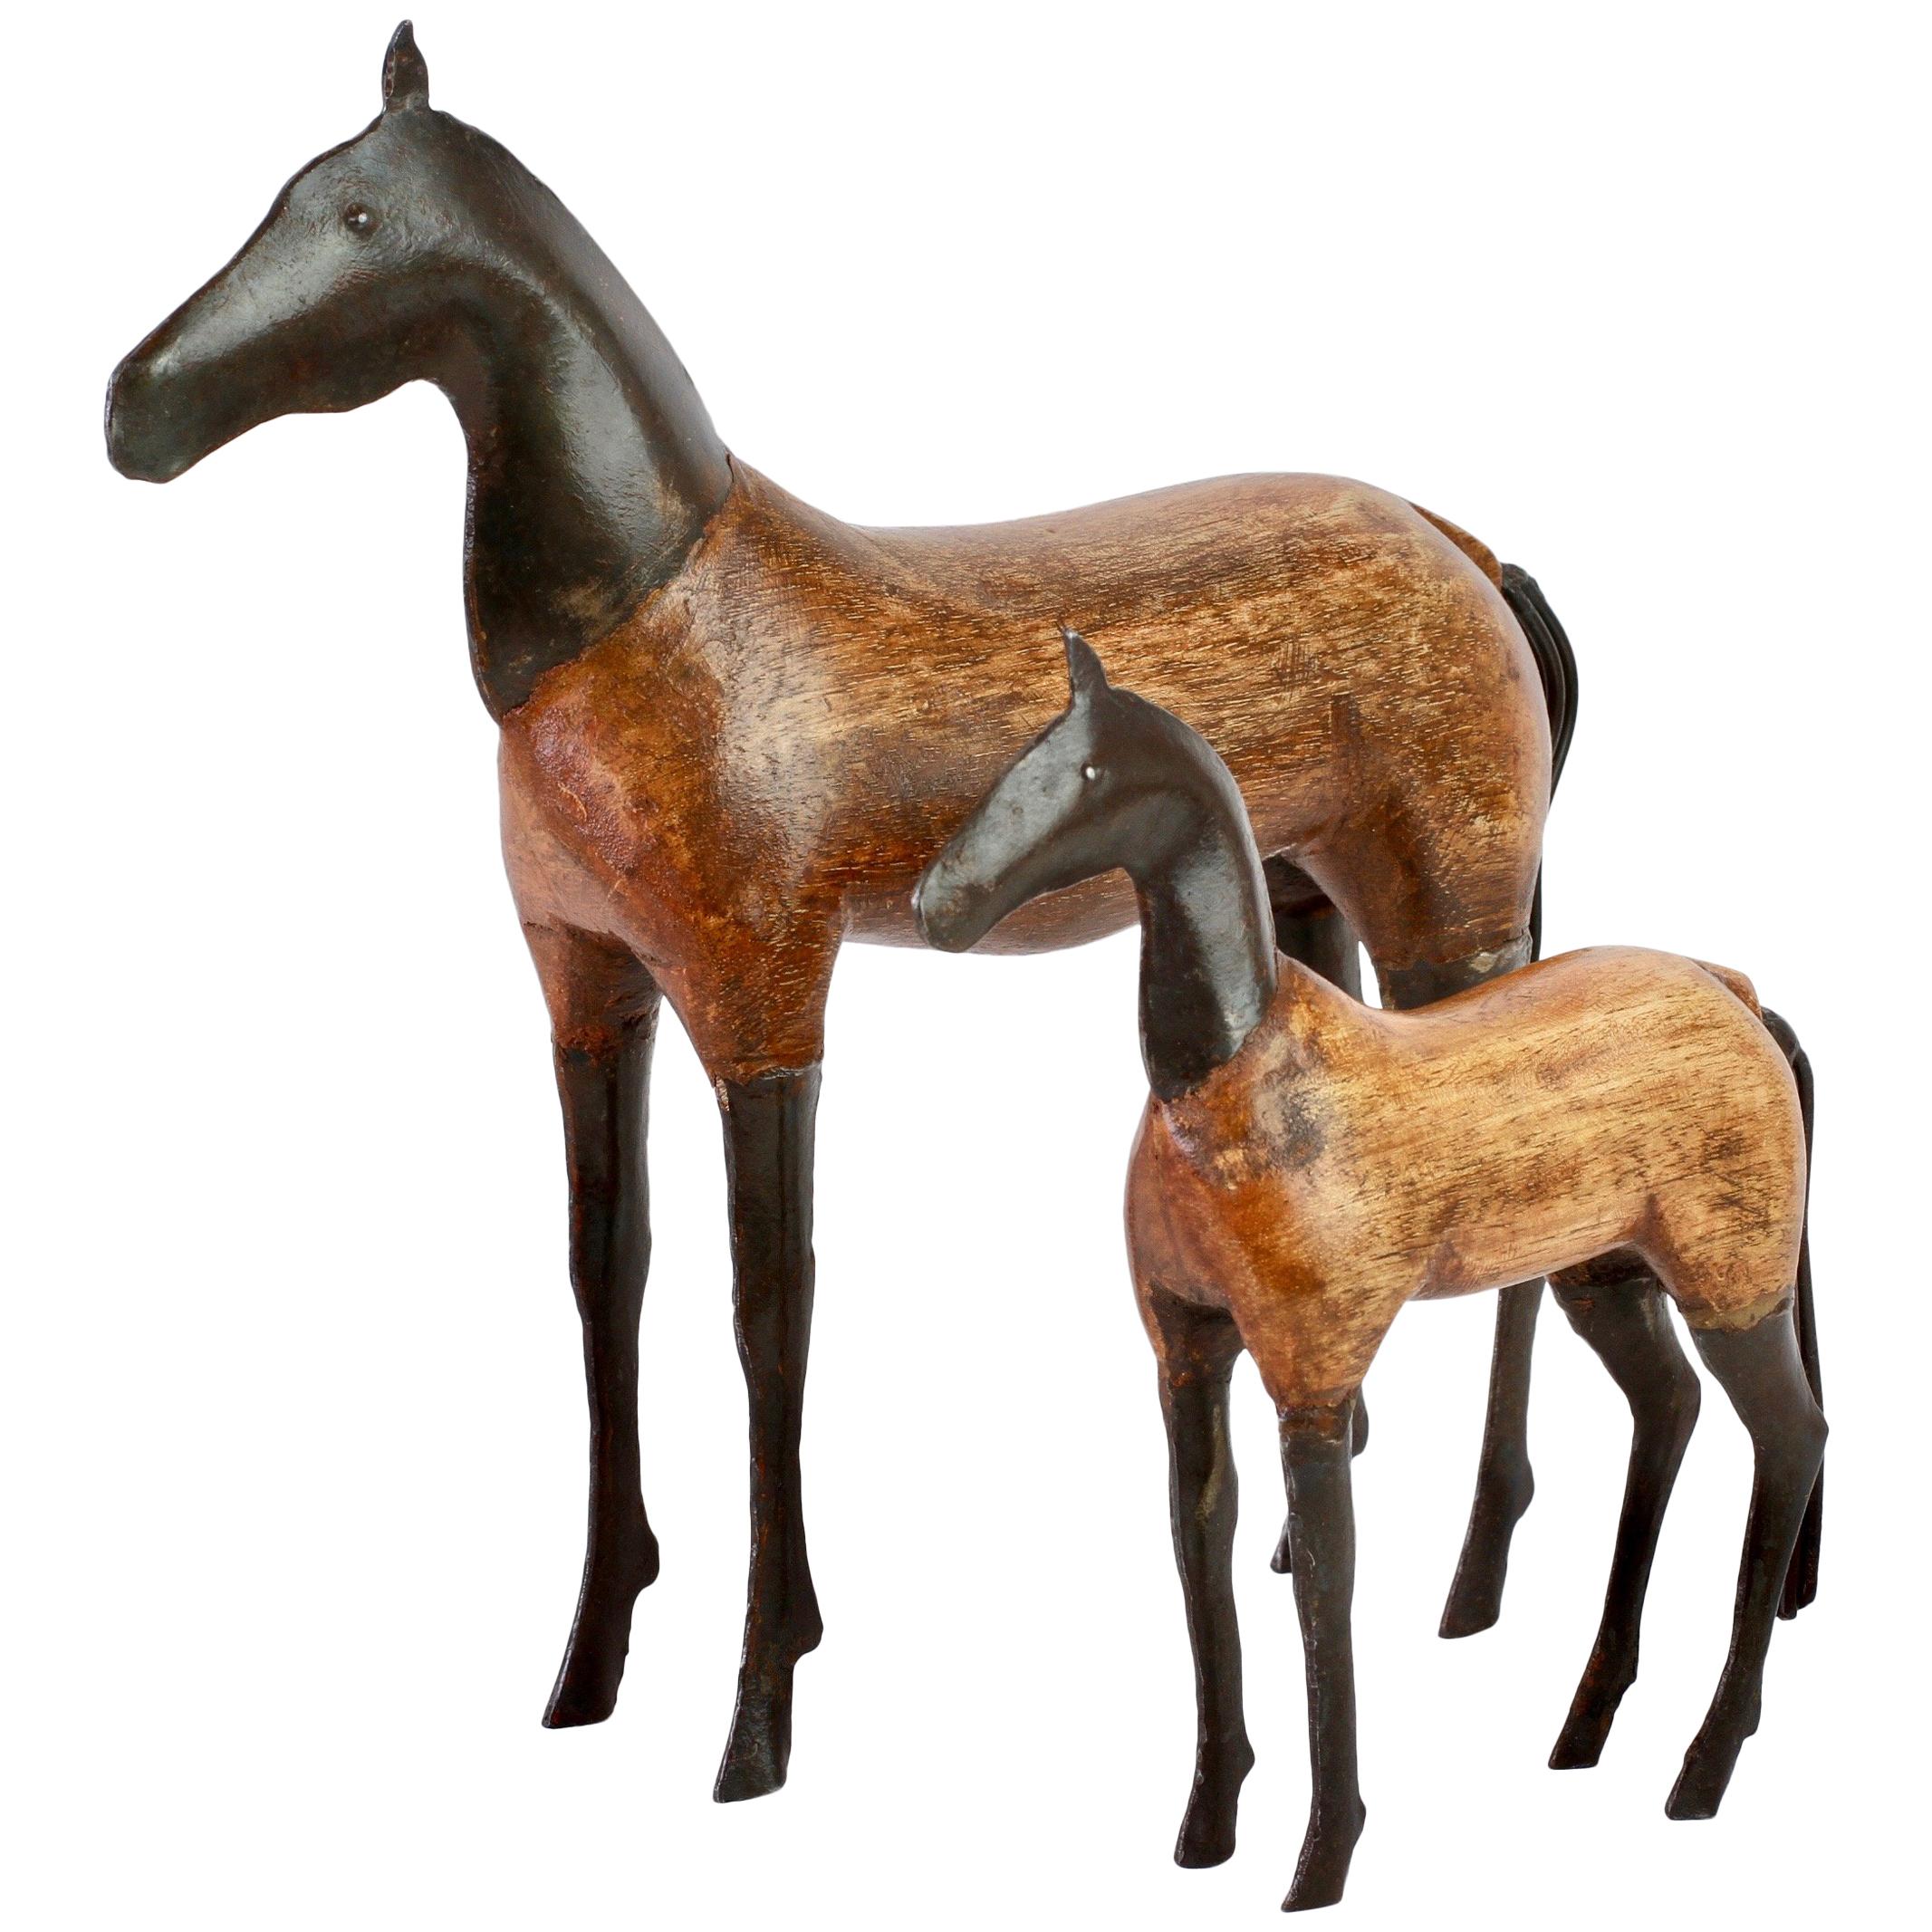 Pair of Vintage Hand-Carved Wooden and Metal Horse Sculptures, circa 1980s